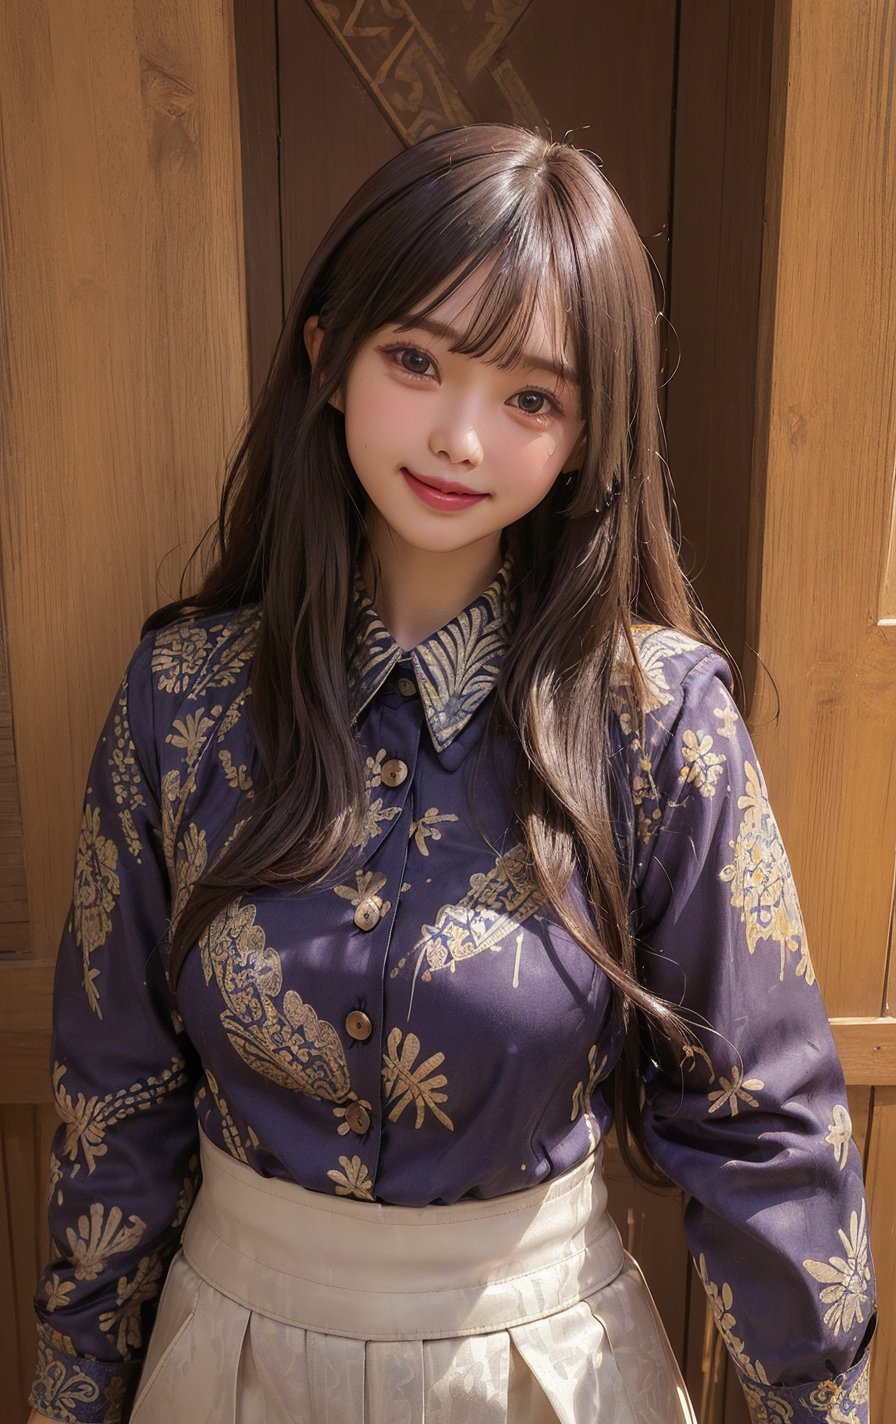 (((((Batik_top_button_collared_shirt:1.6))))),(((((long_pants:1.5))))),((((standing:1.5)))),(((front_viewed,looking_at_viewer:1.6))),(((((long_hair_with_complete_bangs:1.6))))),(((beautiful and aesthetic:1.4))),(((((smile_face:1.6))))),((((round cheeks, high-bridged nose:1.5)))),(((((office:1.7))))),
perfect.,Bomi,Enhance,Model ,Asian ,eungirl,((((1girl)))).,((Perfect lips)),lora:Ultra_Detailer:2